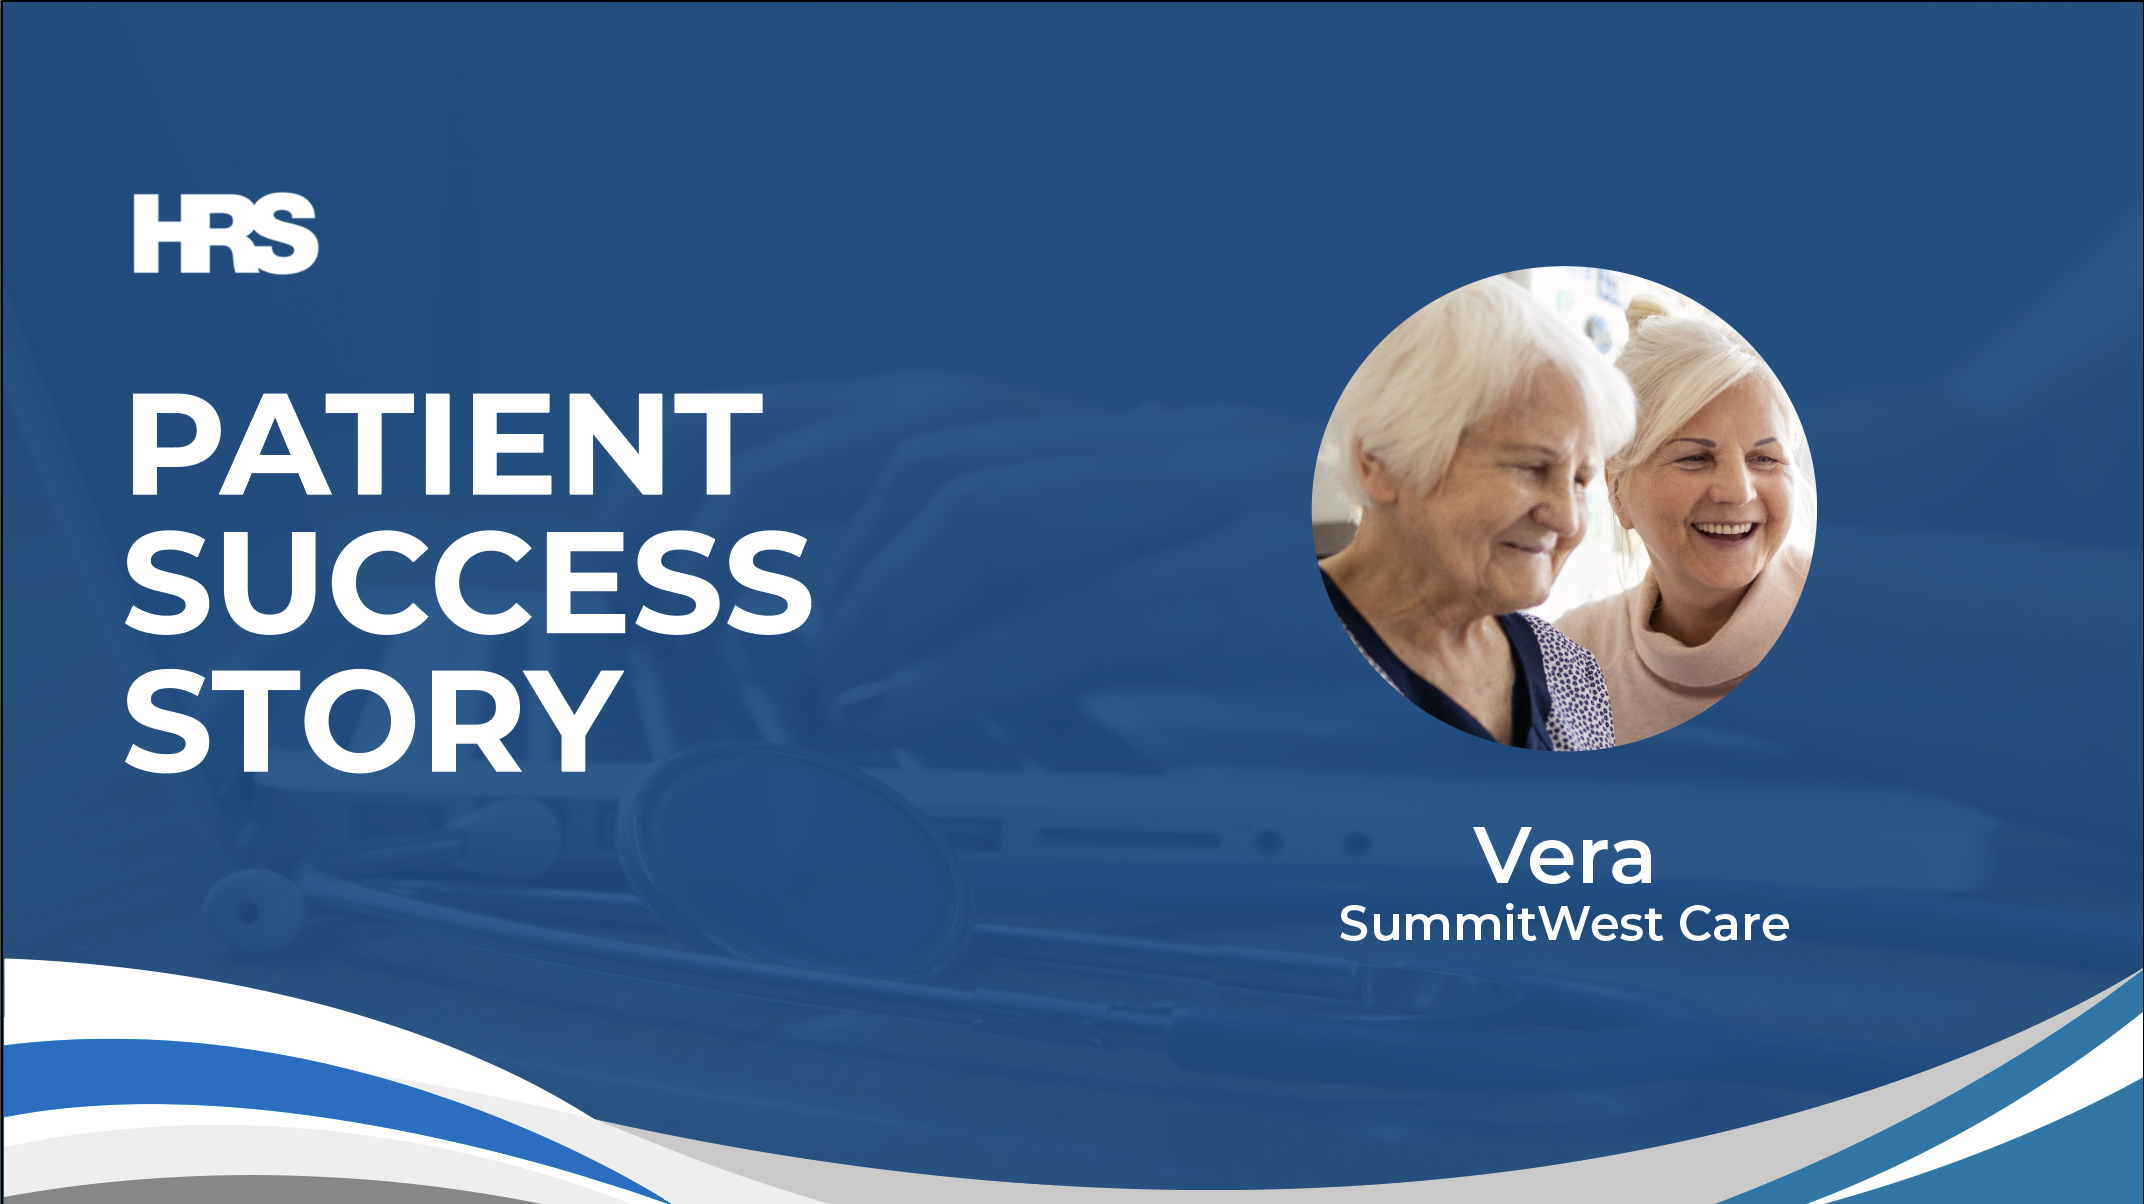 Veras Telehealth and RPM Patient Story